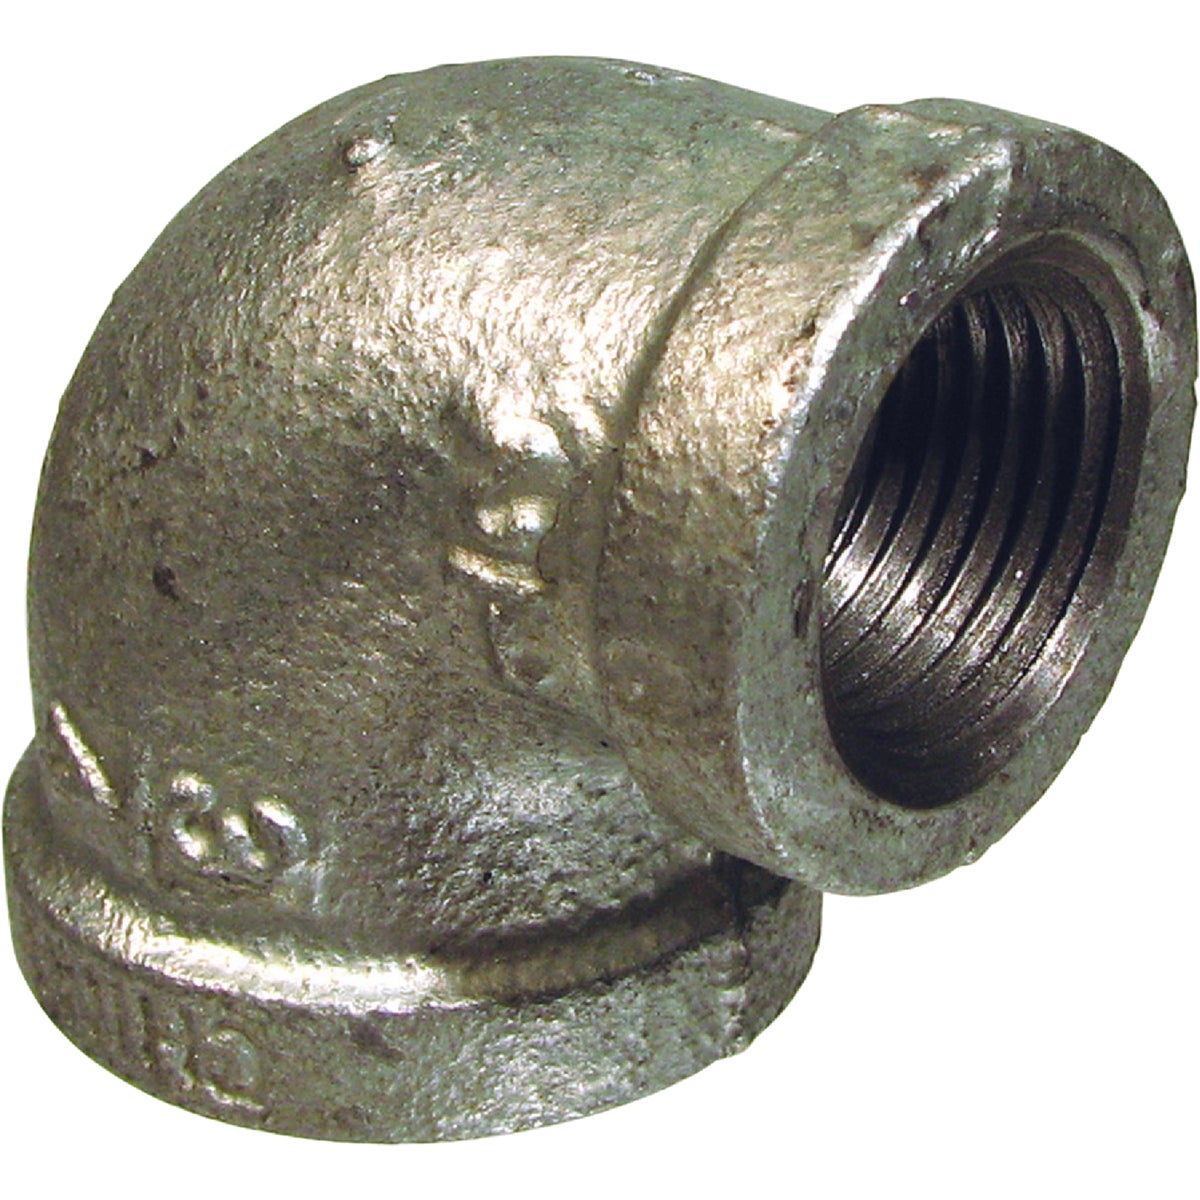 Southland 1 In. x 3/4 In. 90 Deg. Reducing Galvanized Elbow (1/4 Bend)